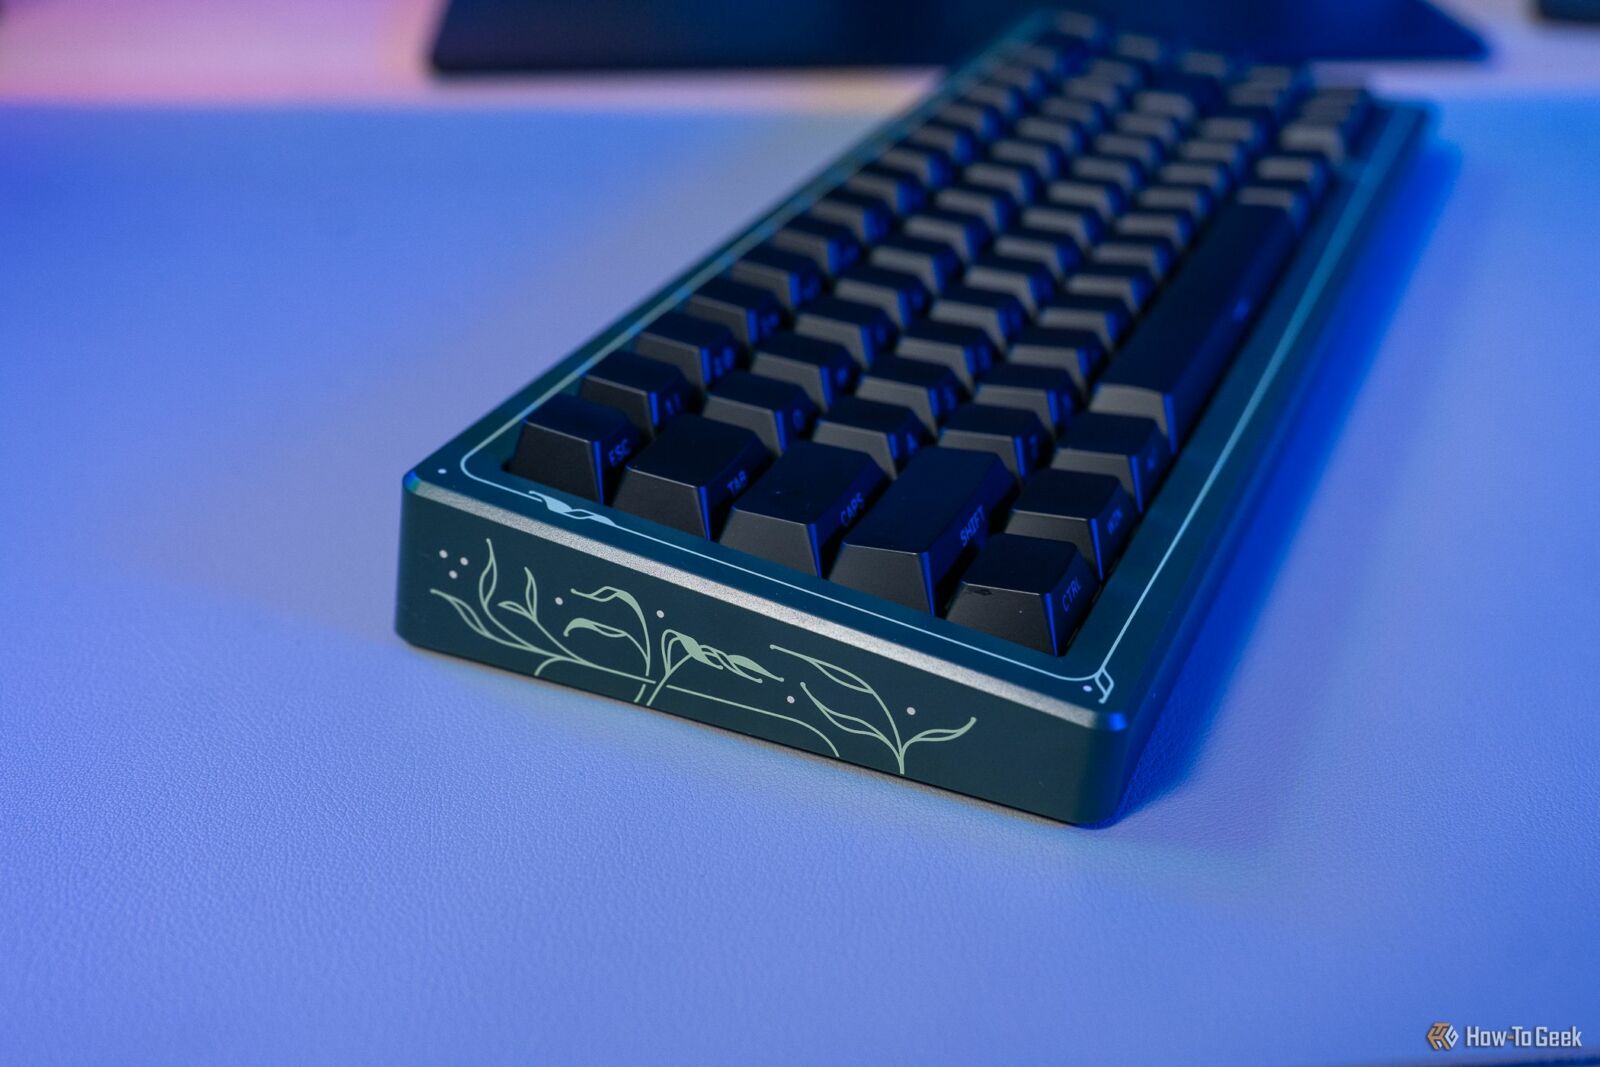 Side view of the drop CSTM65 keyboard with a custom cover attached